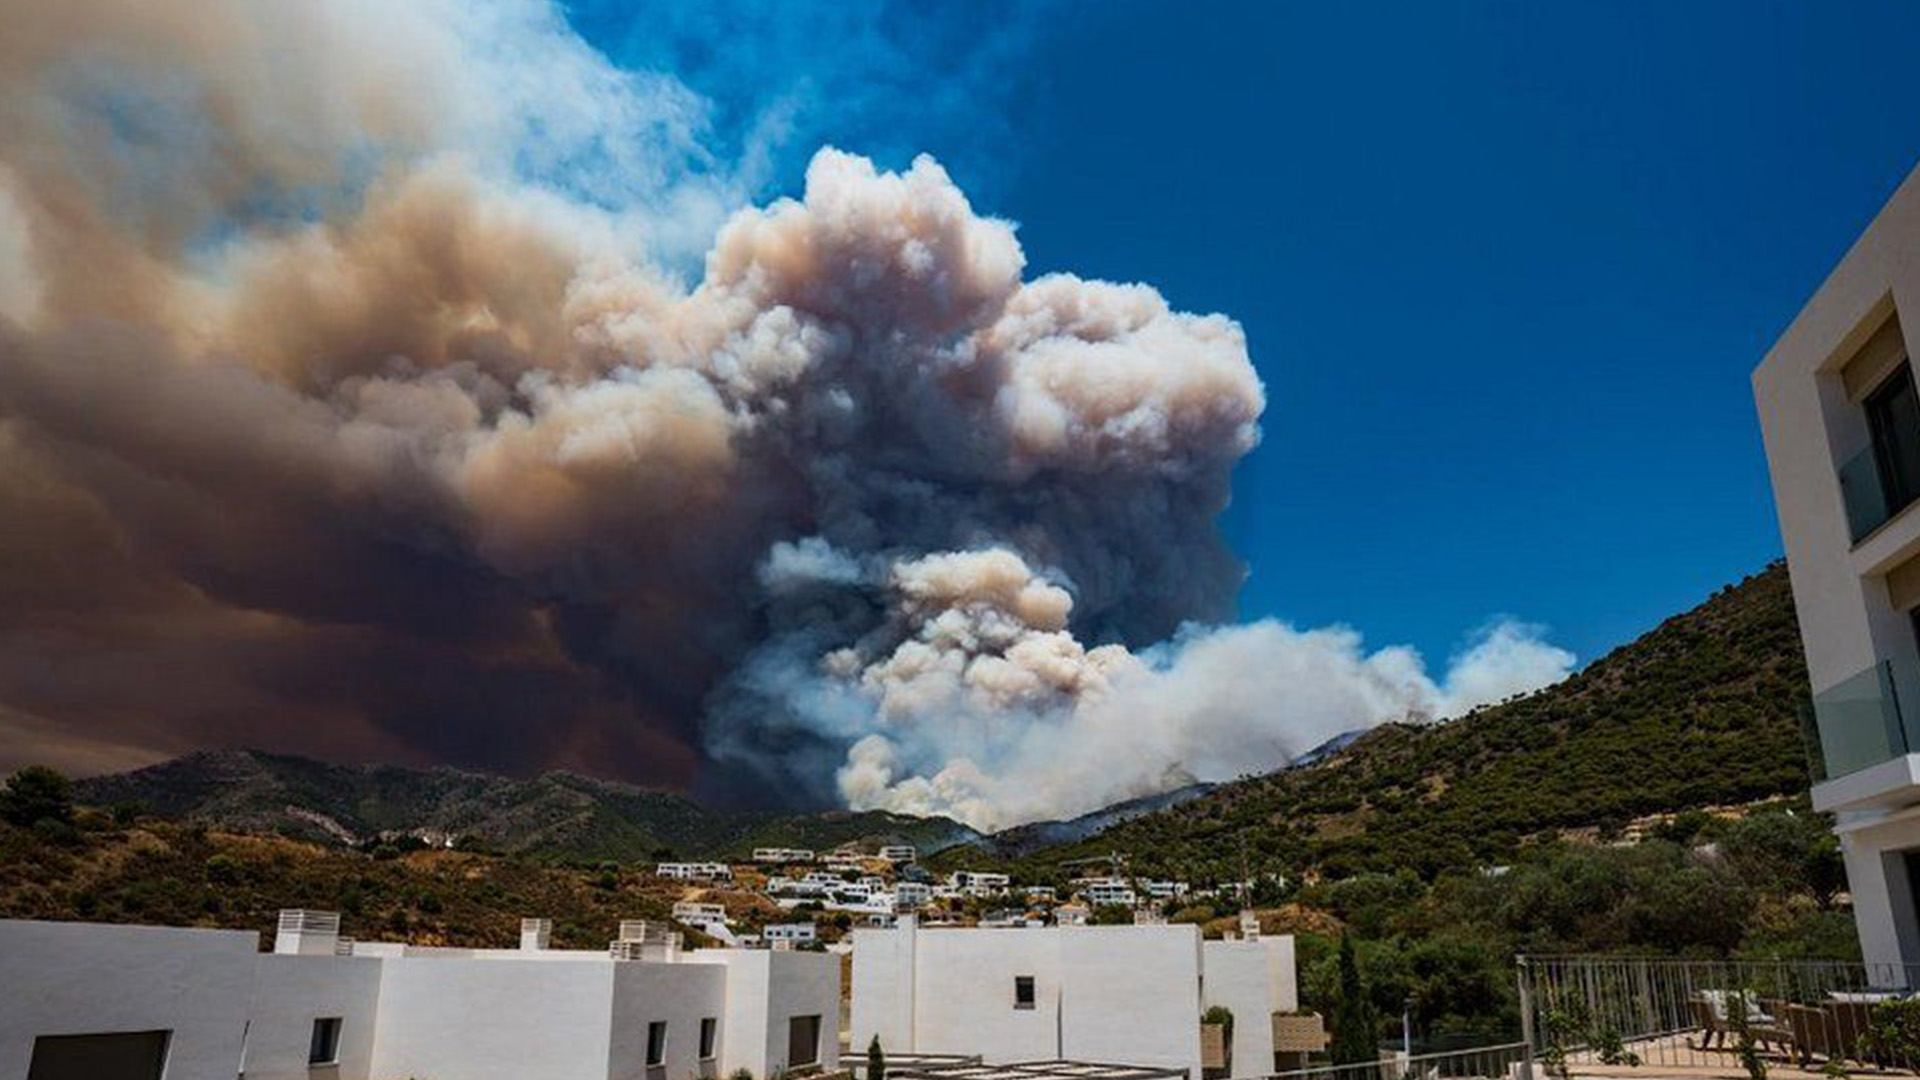  Southern Spain: Fires in the Mijas hills are not far from holiday homes - Photo Credit; BBC / Ashley Baker 